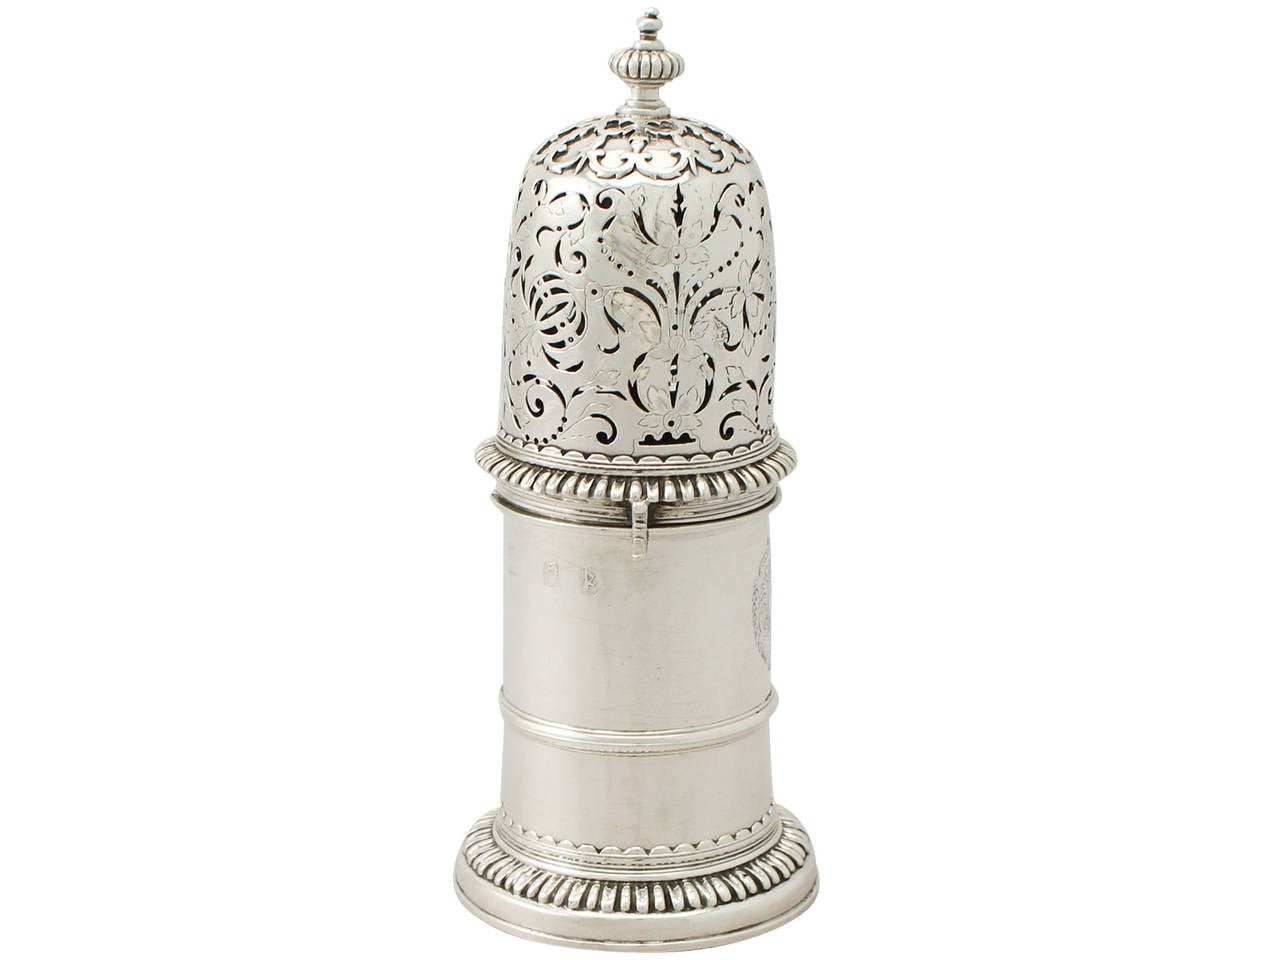 An exceptional, fine and impressive antique William III English Britannia standard silver lighthouse style sugar caster; an addition to our silver teaware collection.

This exceptional antique William III English Britannia standard silver* sugar